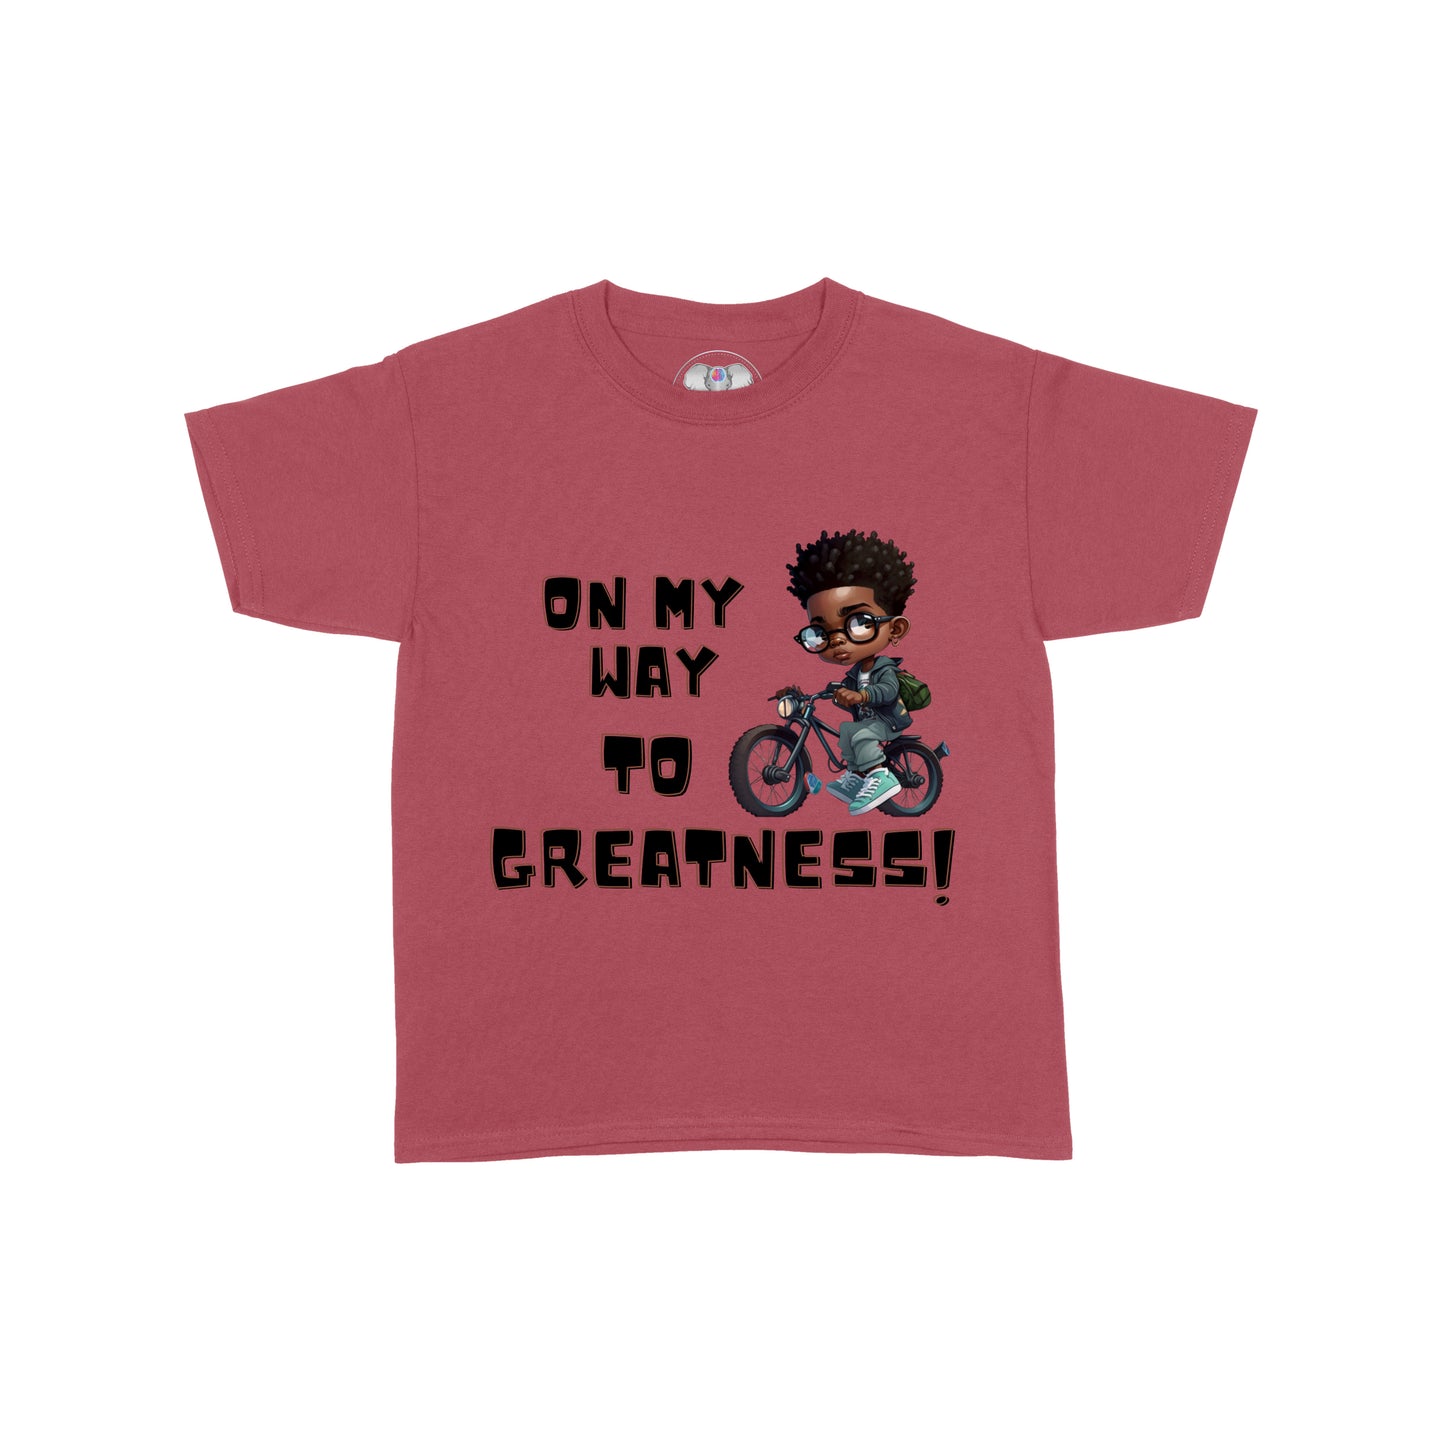 On My Way Greatness Graphic T-shirt